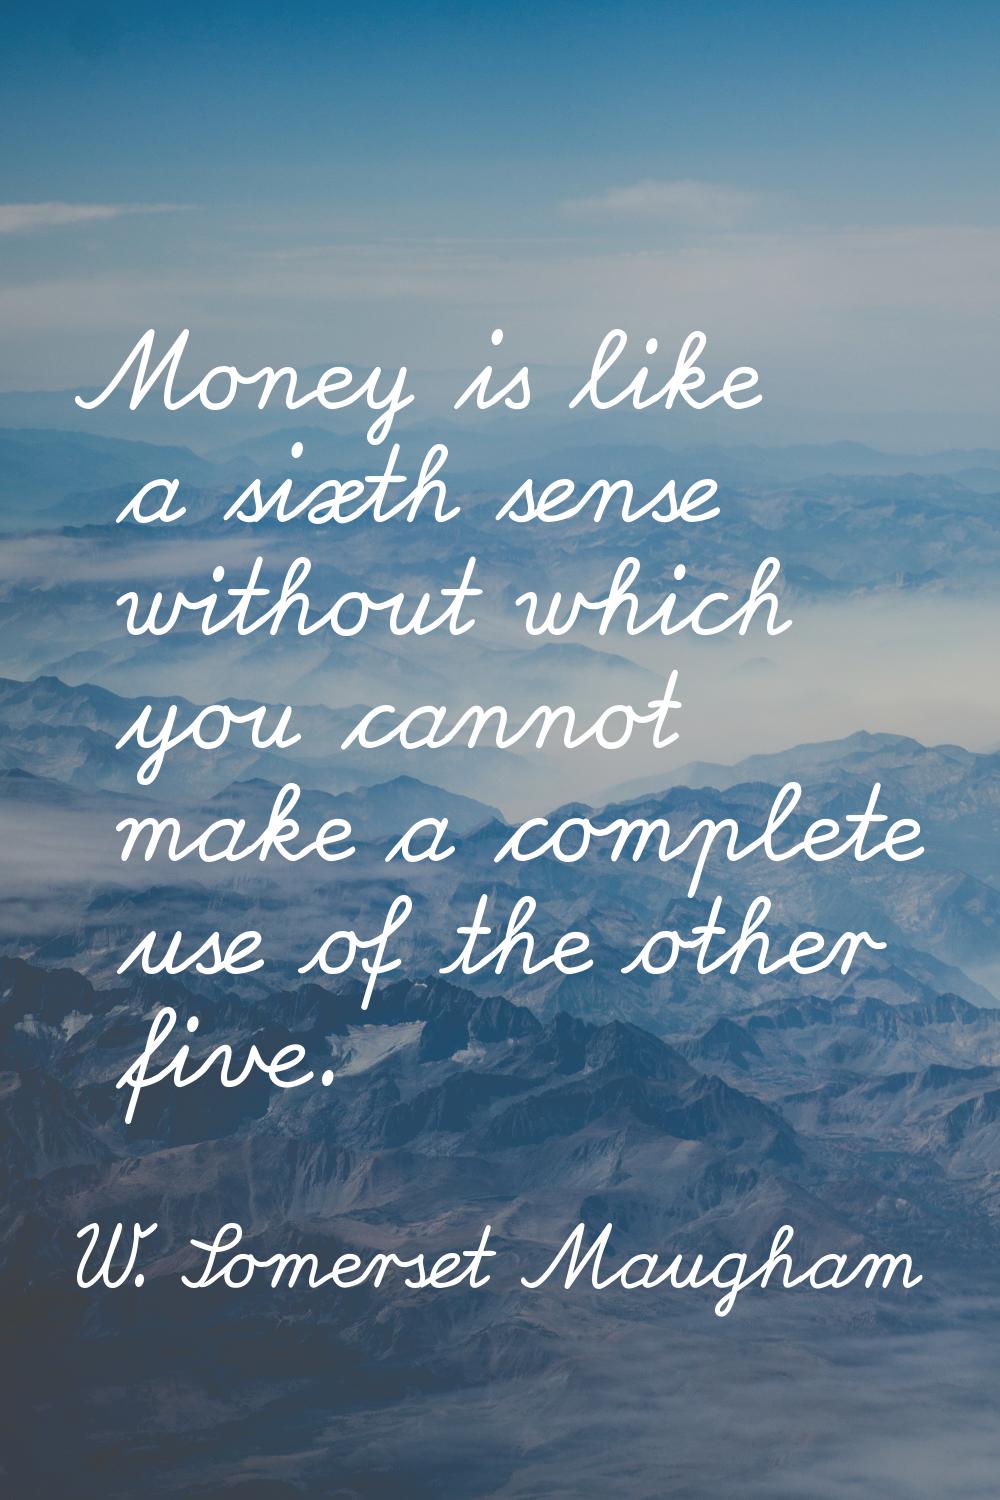 Money is like a sixth sense without which you cannot make a complete use of the other five.